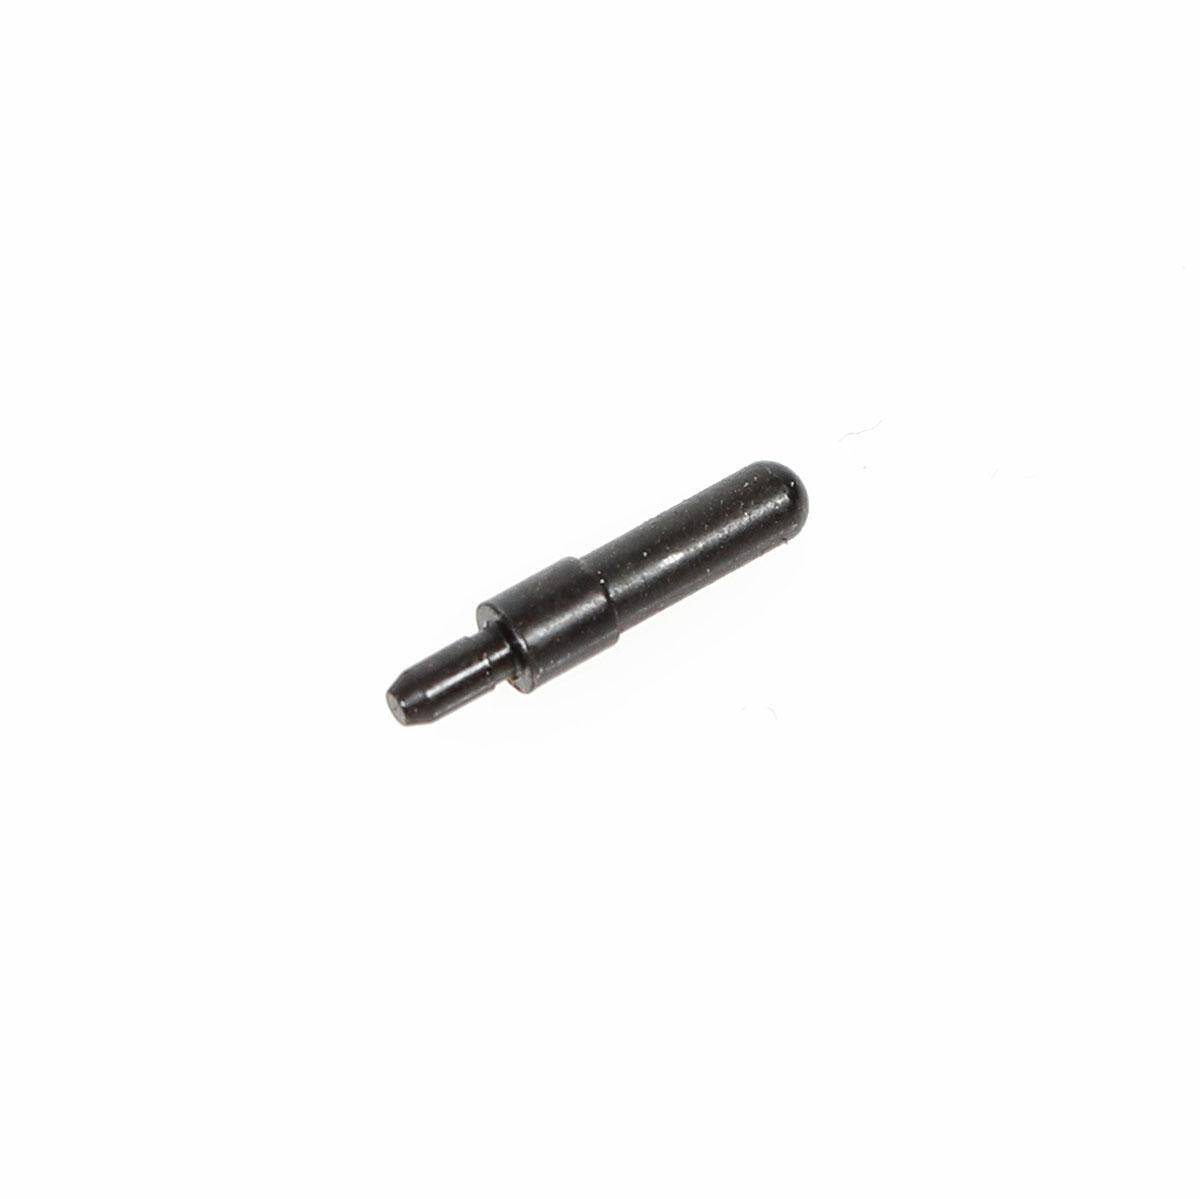 Bul Armory Slide Stop Plunger Pin